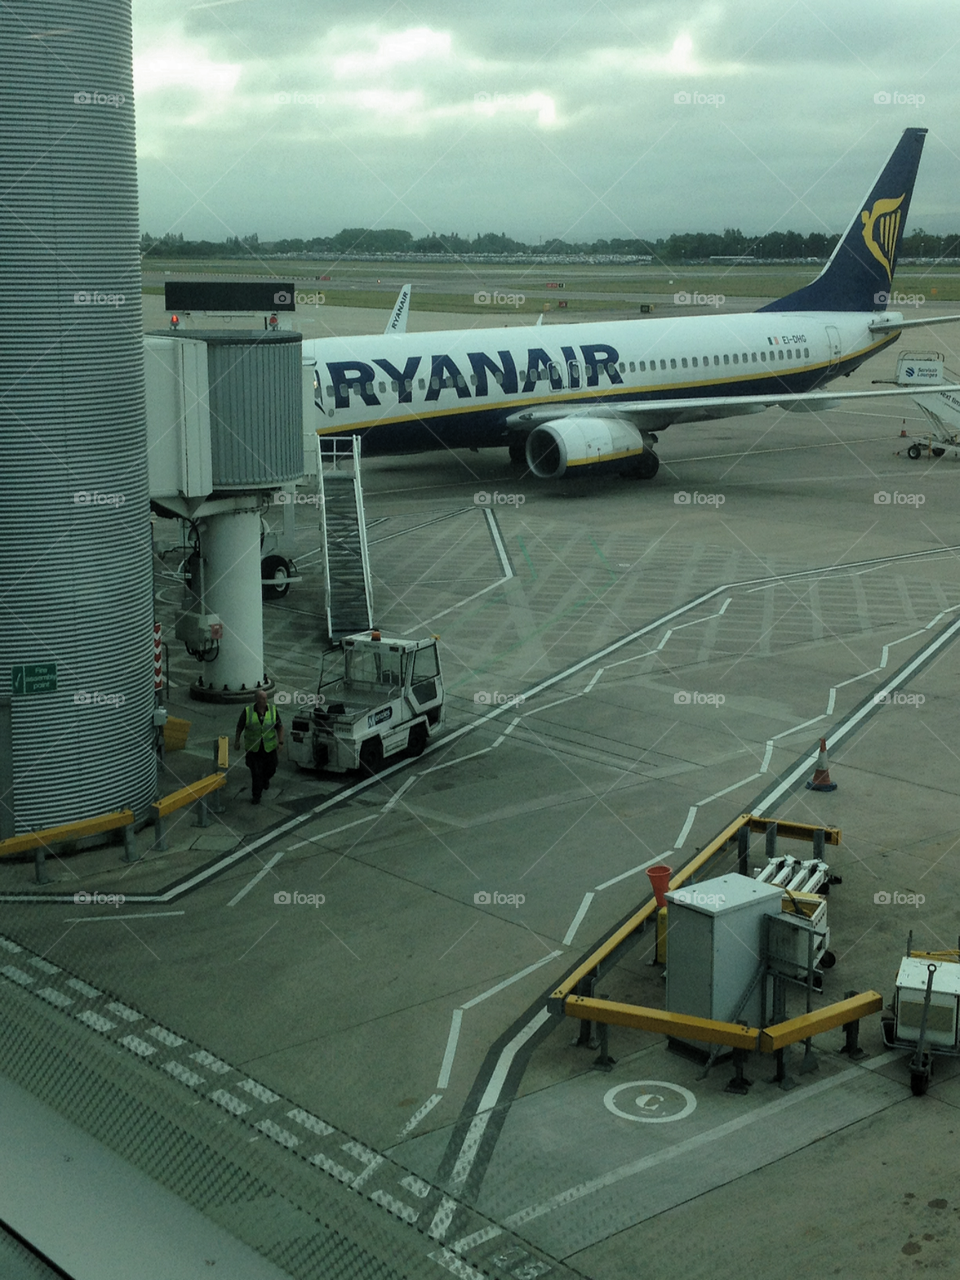 on the tarmac. sat in the lounge at Belfast airport